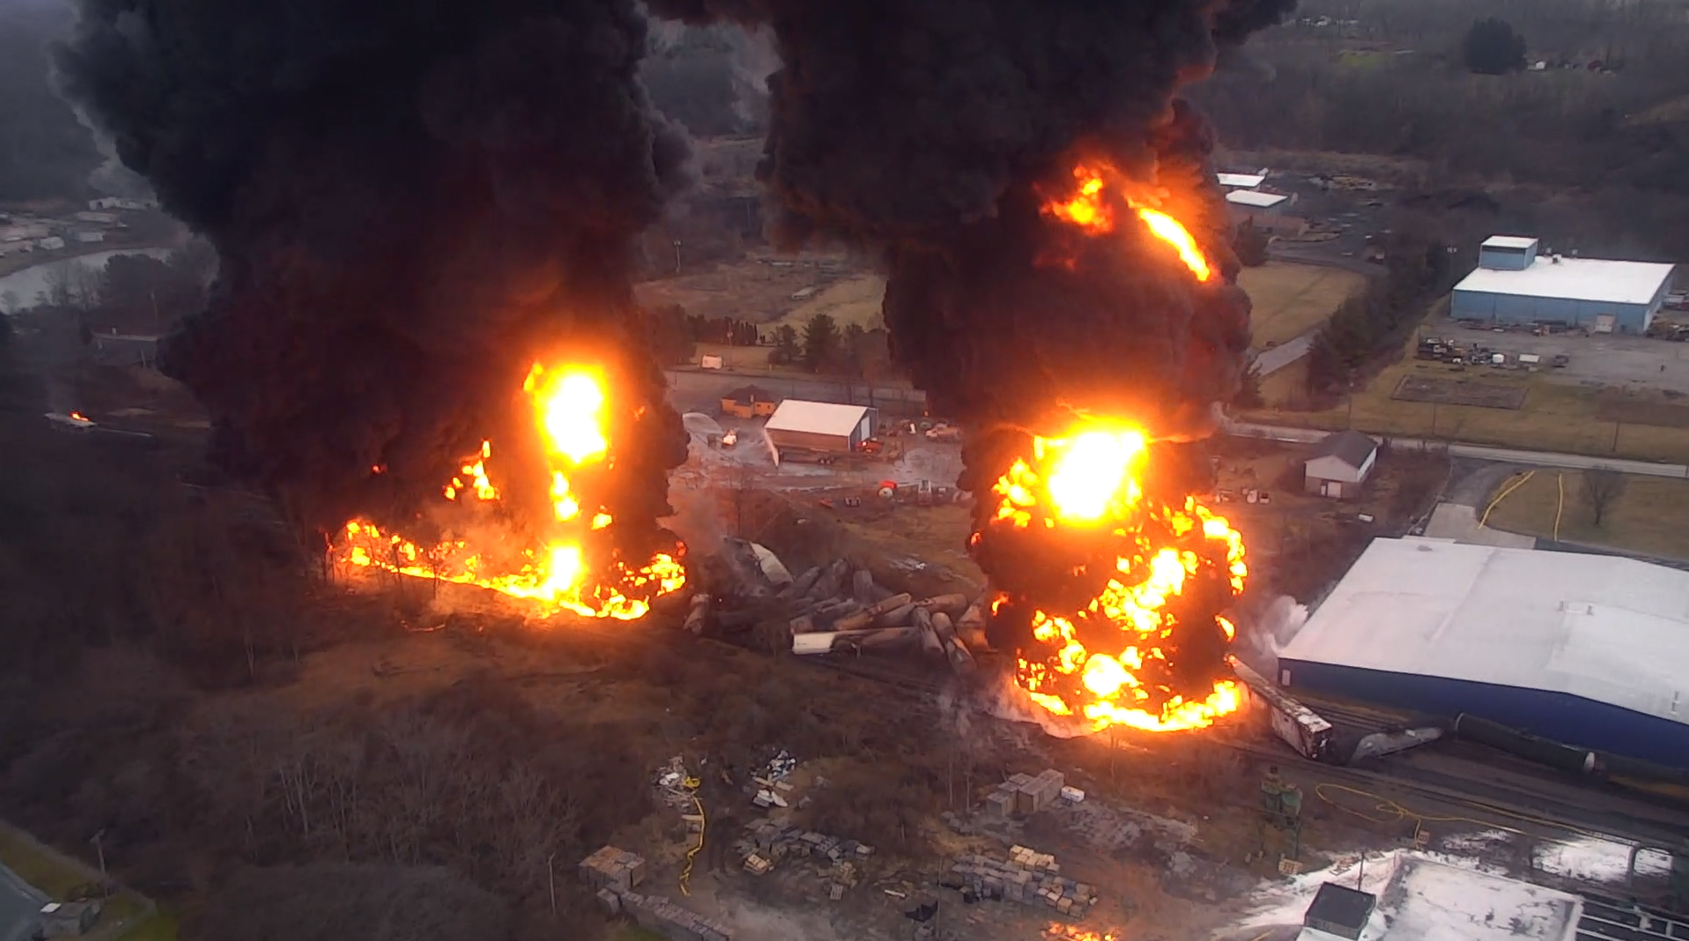 aerial view of the accident scene, derailed train, and subsequent hazardous material release and fires. 